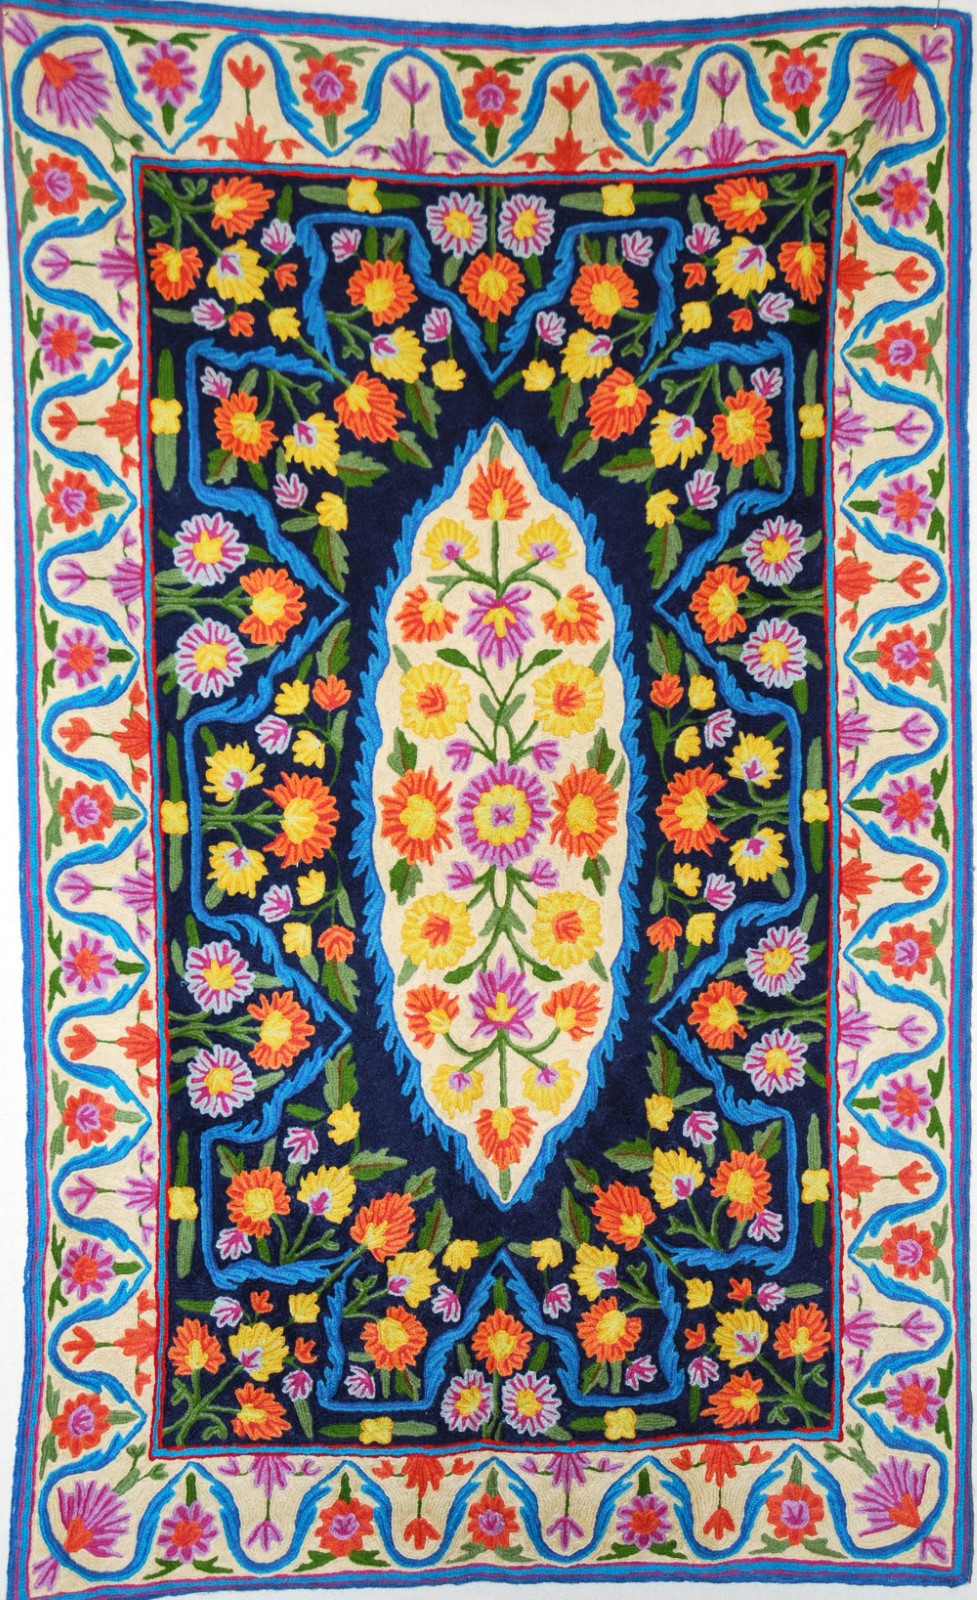 Handmade Tapestry Woolen Area Rug, Multicolor Embroidery 3x5 feet #CWR15133